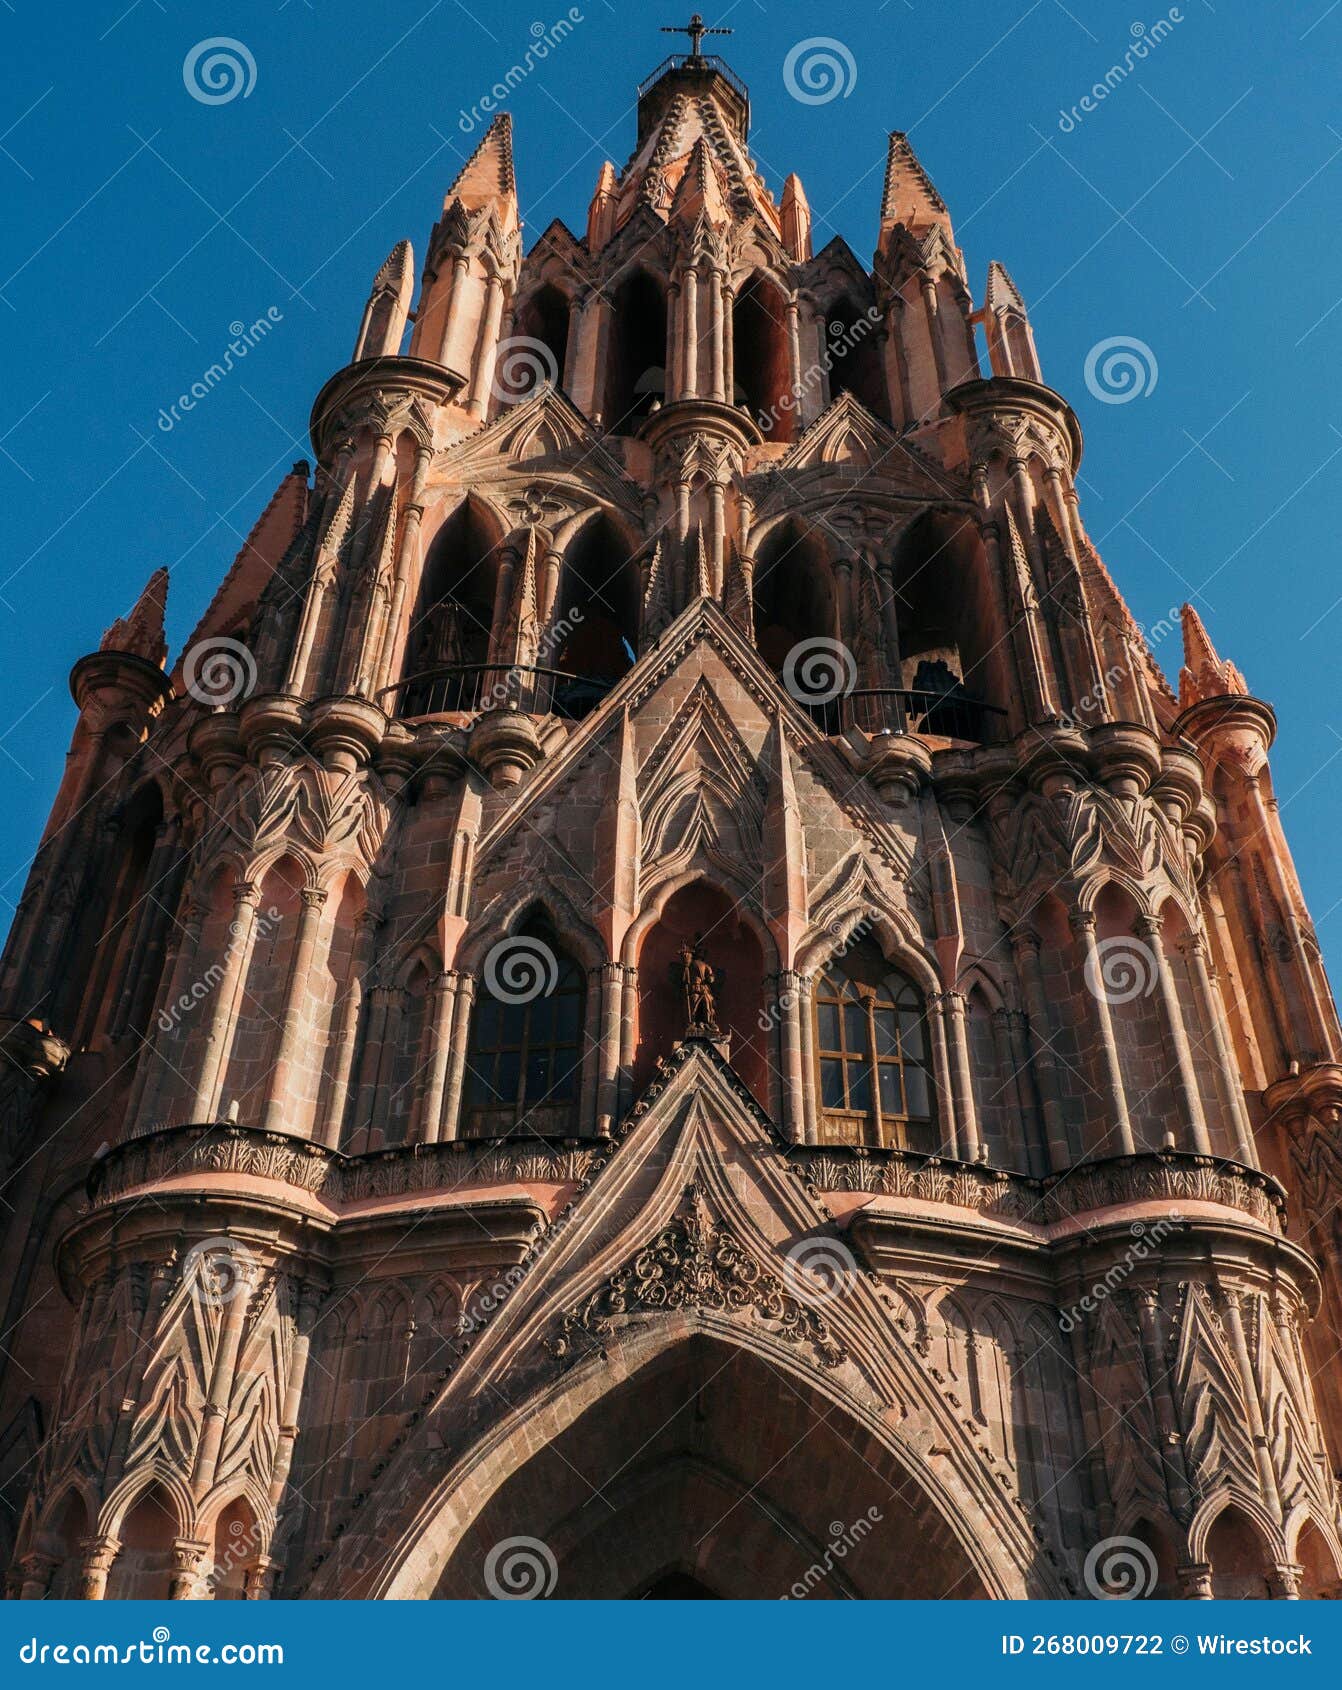 vertical low-angle of the parroquia de san miguel arcangel church in mexico against the blue sky